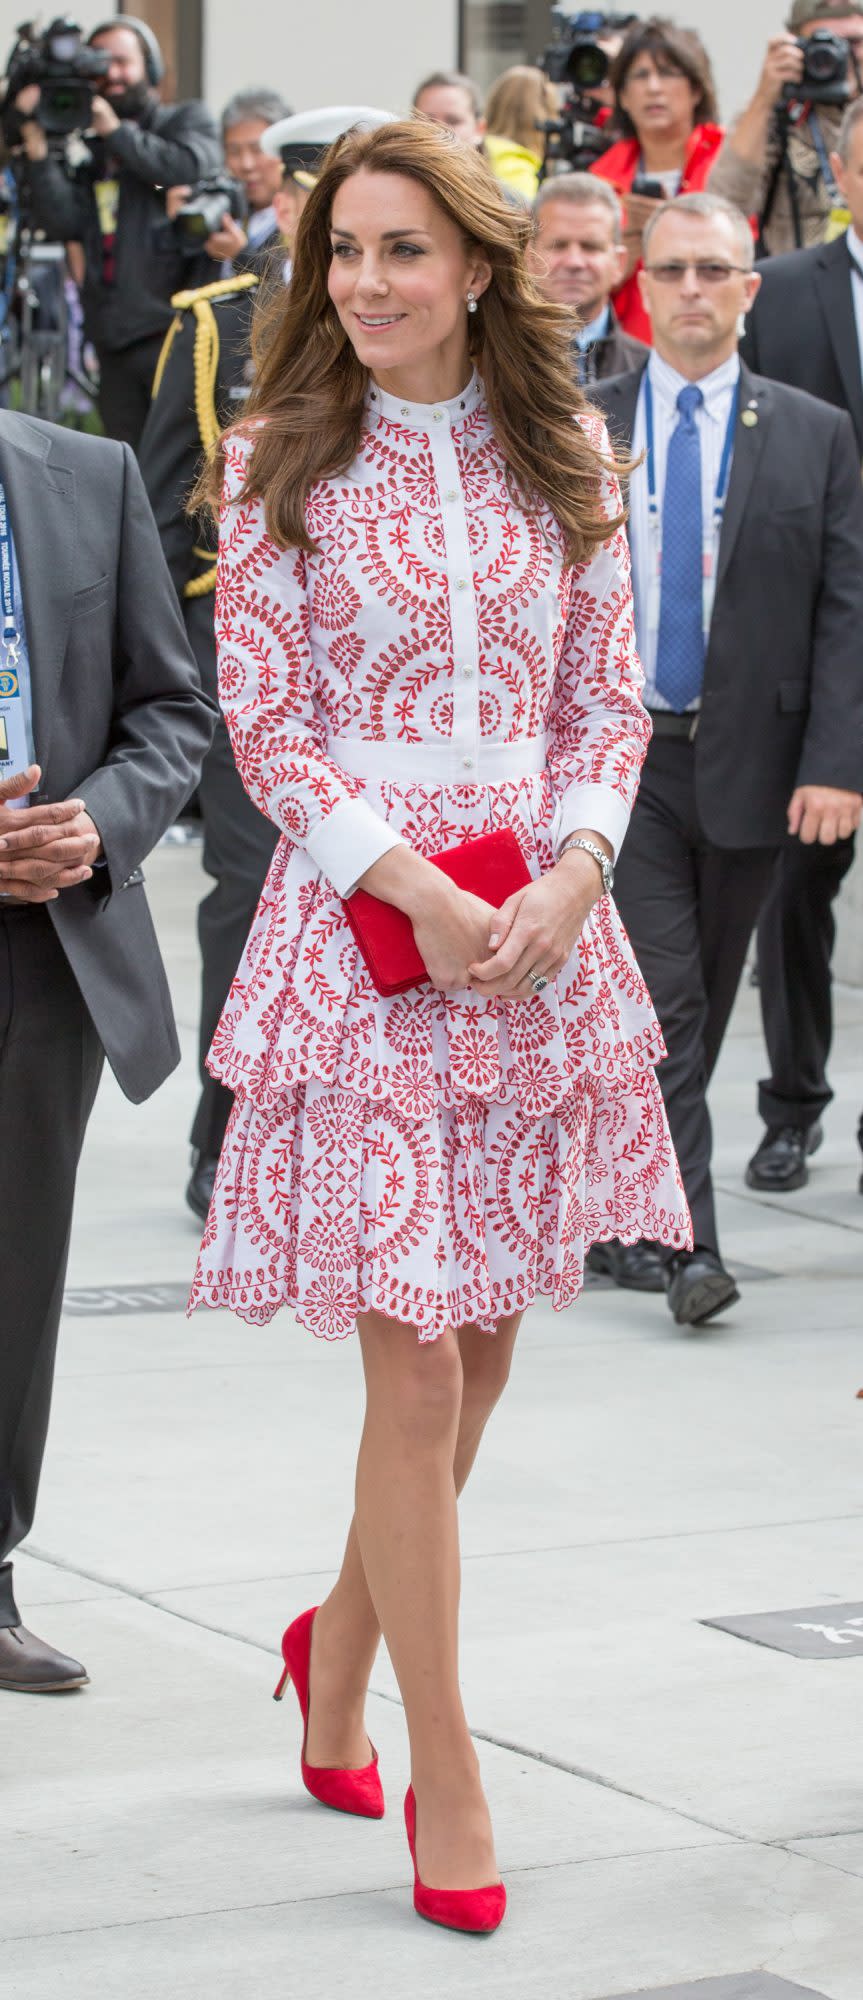 Kate Middleton's Best Fall Looks: 12 Photos to Inspire Your Post-Labor Day Style